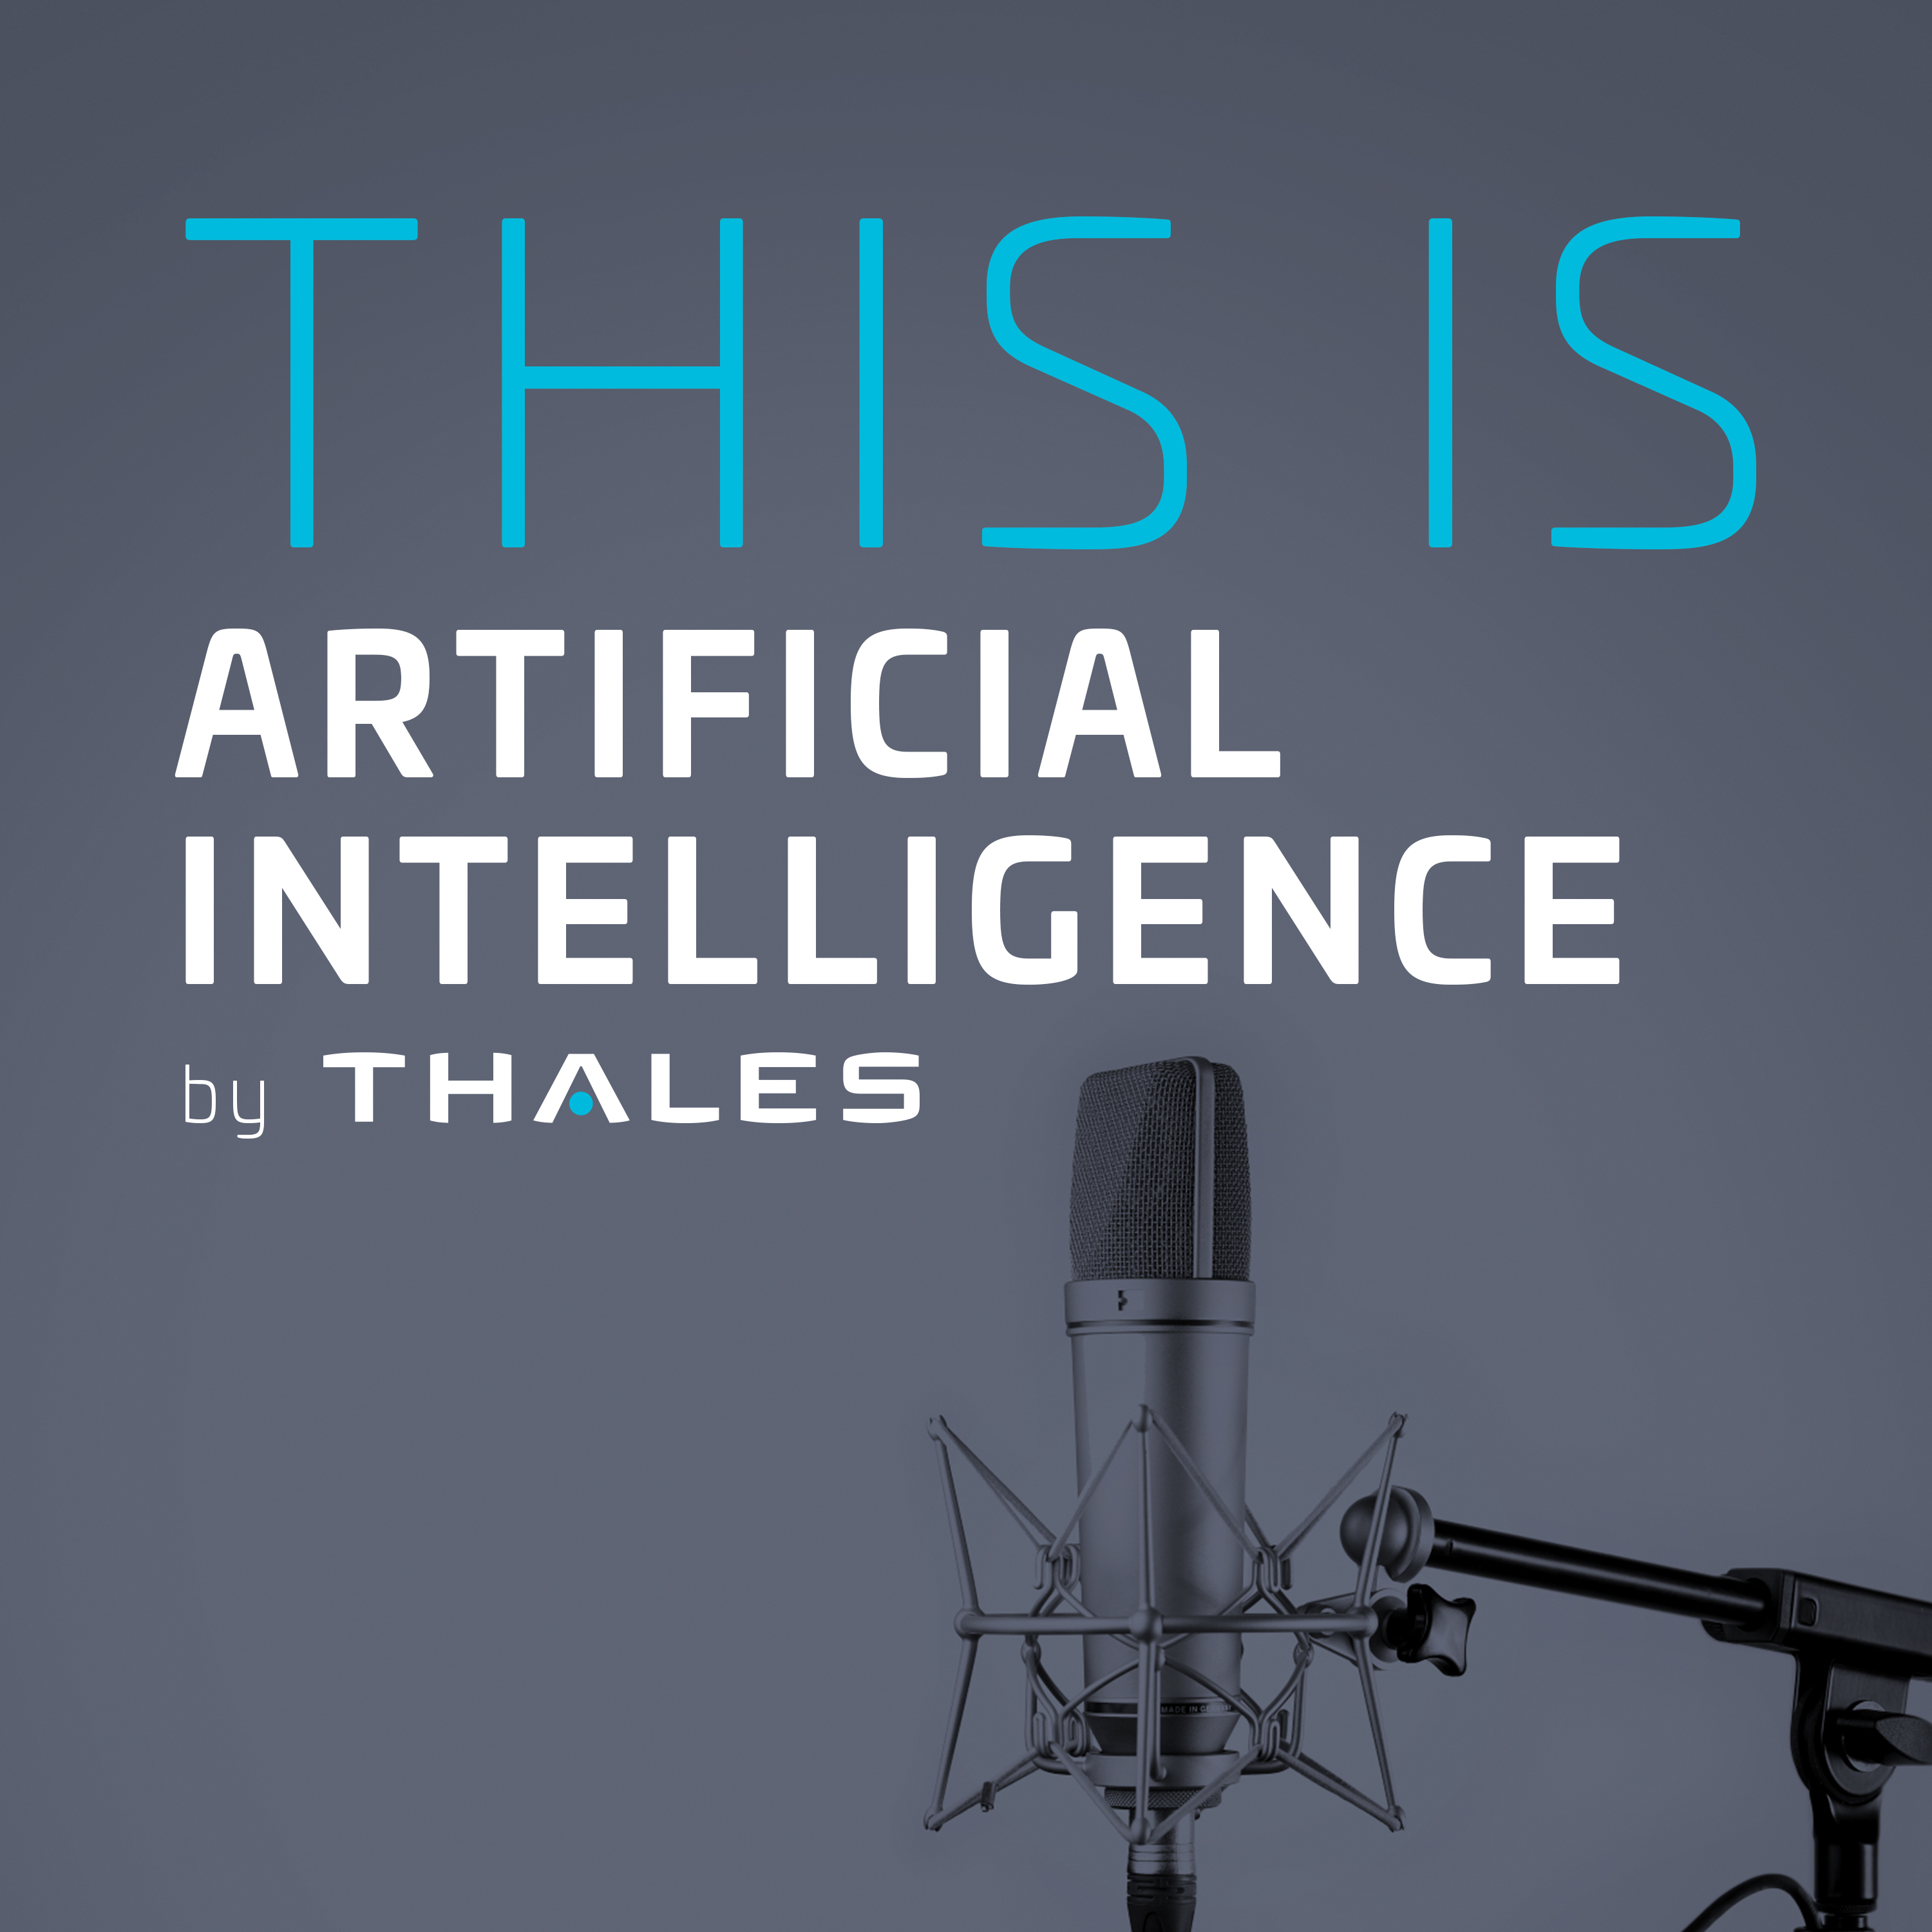 What’s the future of Artificial Intelligence in Critical Environments?